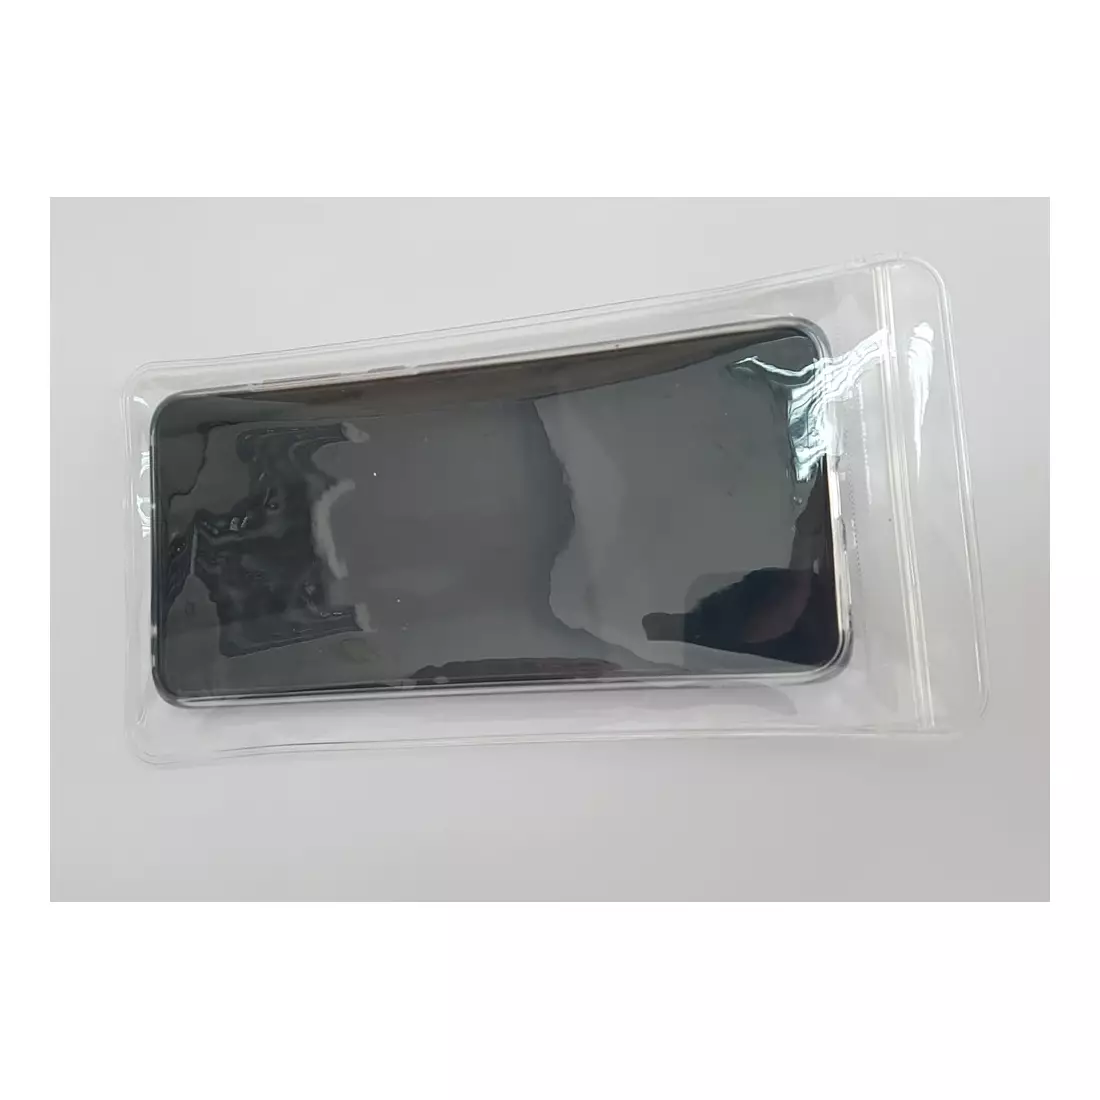 FORCE SKIN waterproof case / cover for the phone 46455